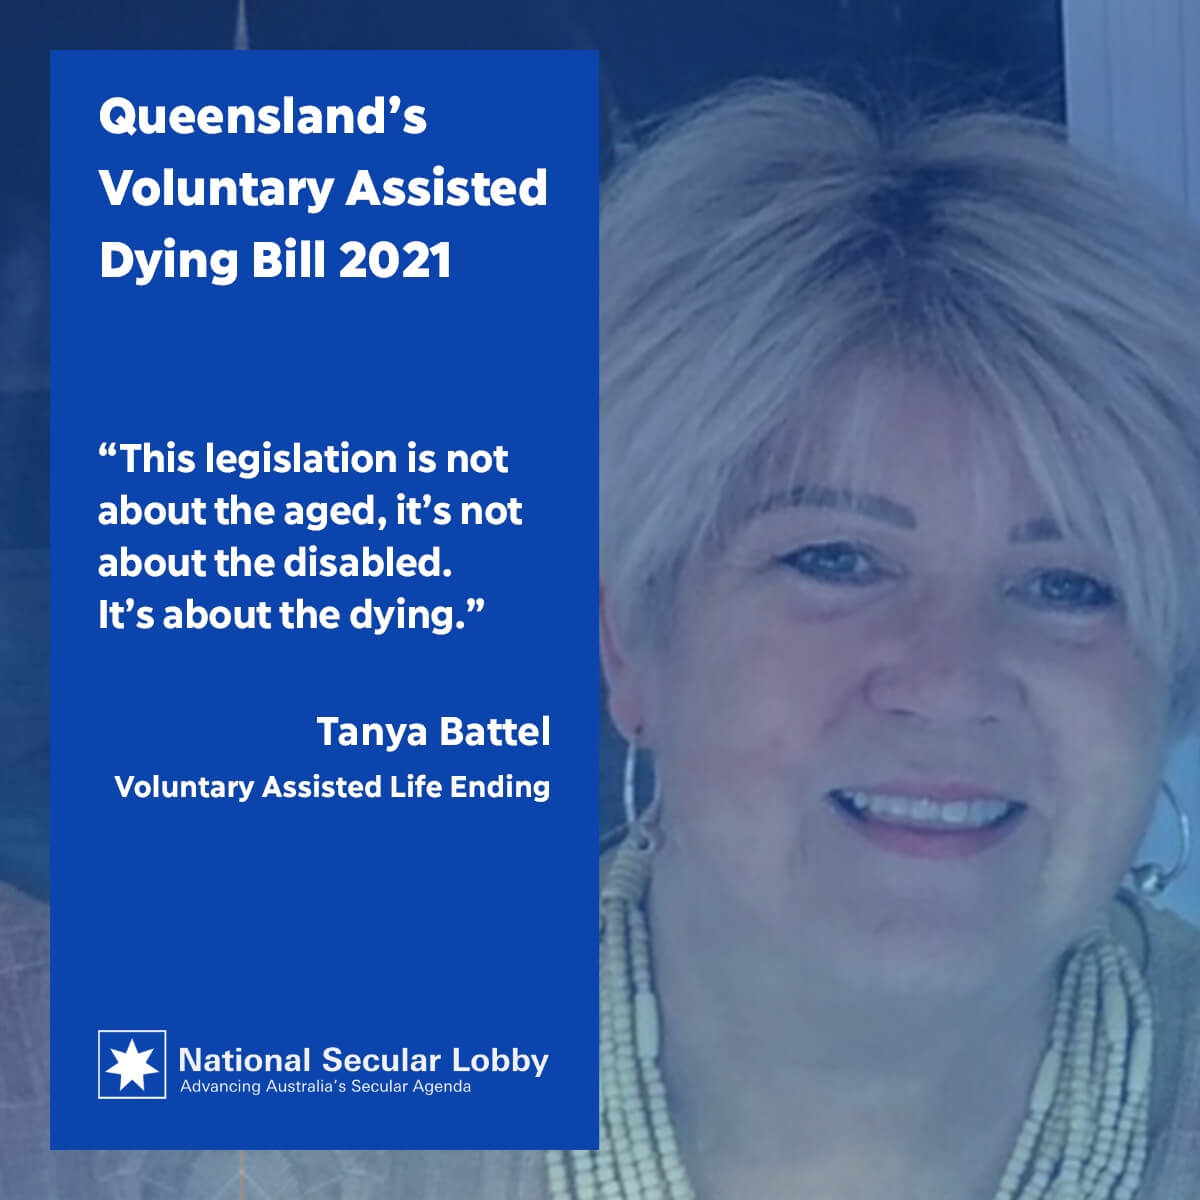 Tanya Battel on Queensland's Voluntary Assisted Dying Bill 2021